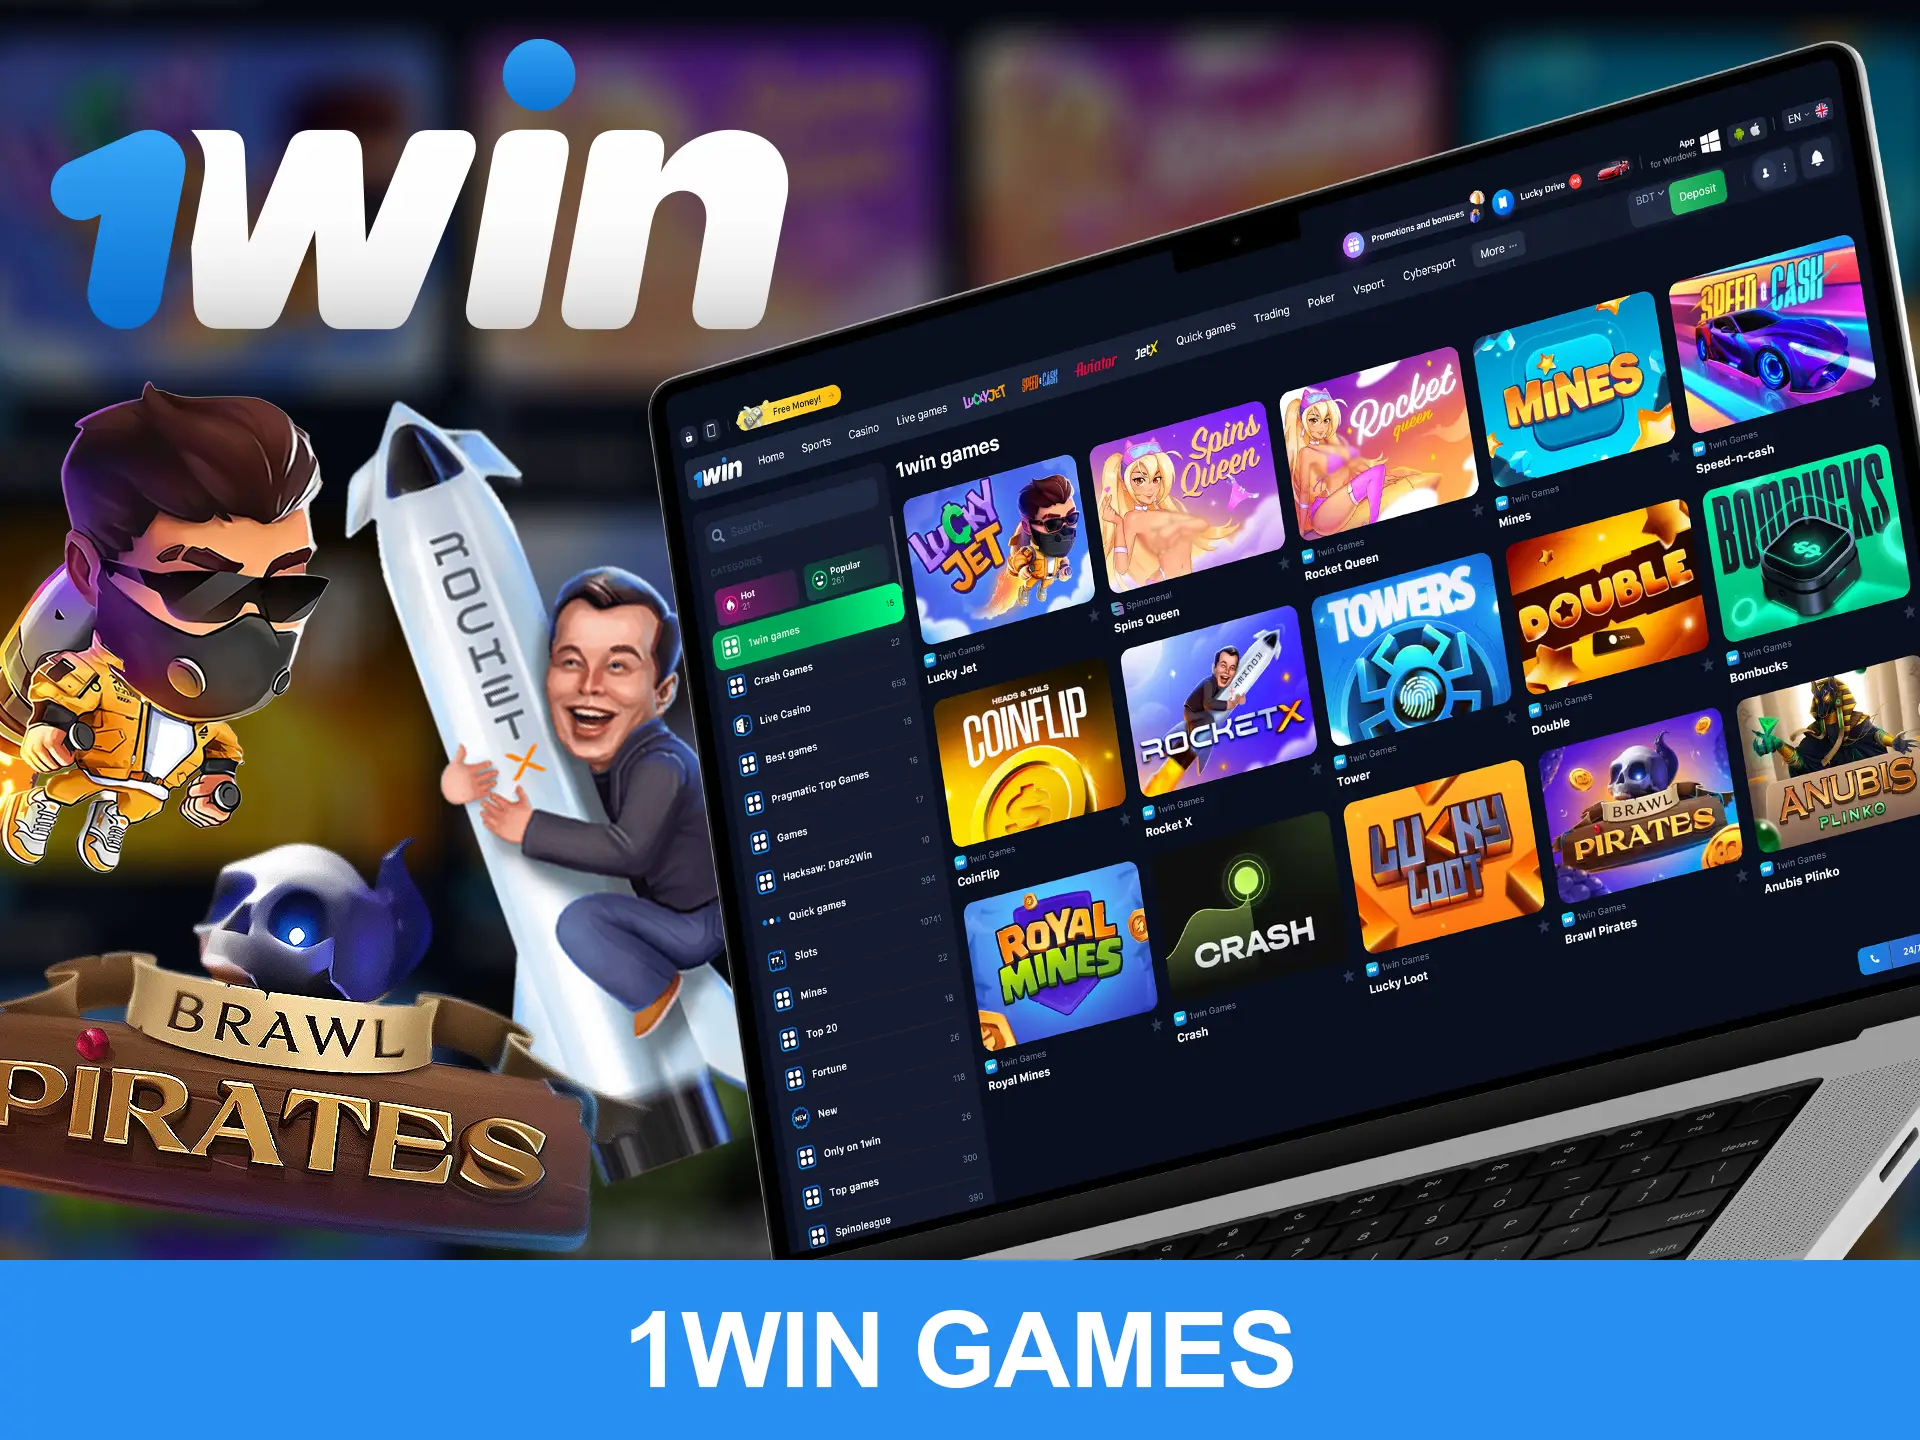 1win offers its own games that you can enjoy.